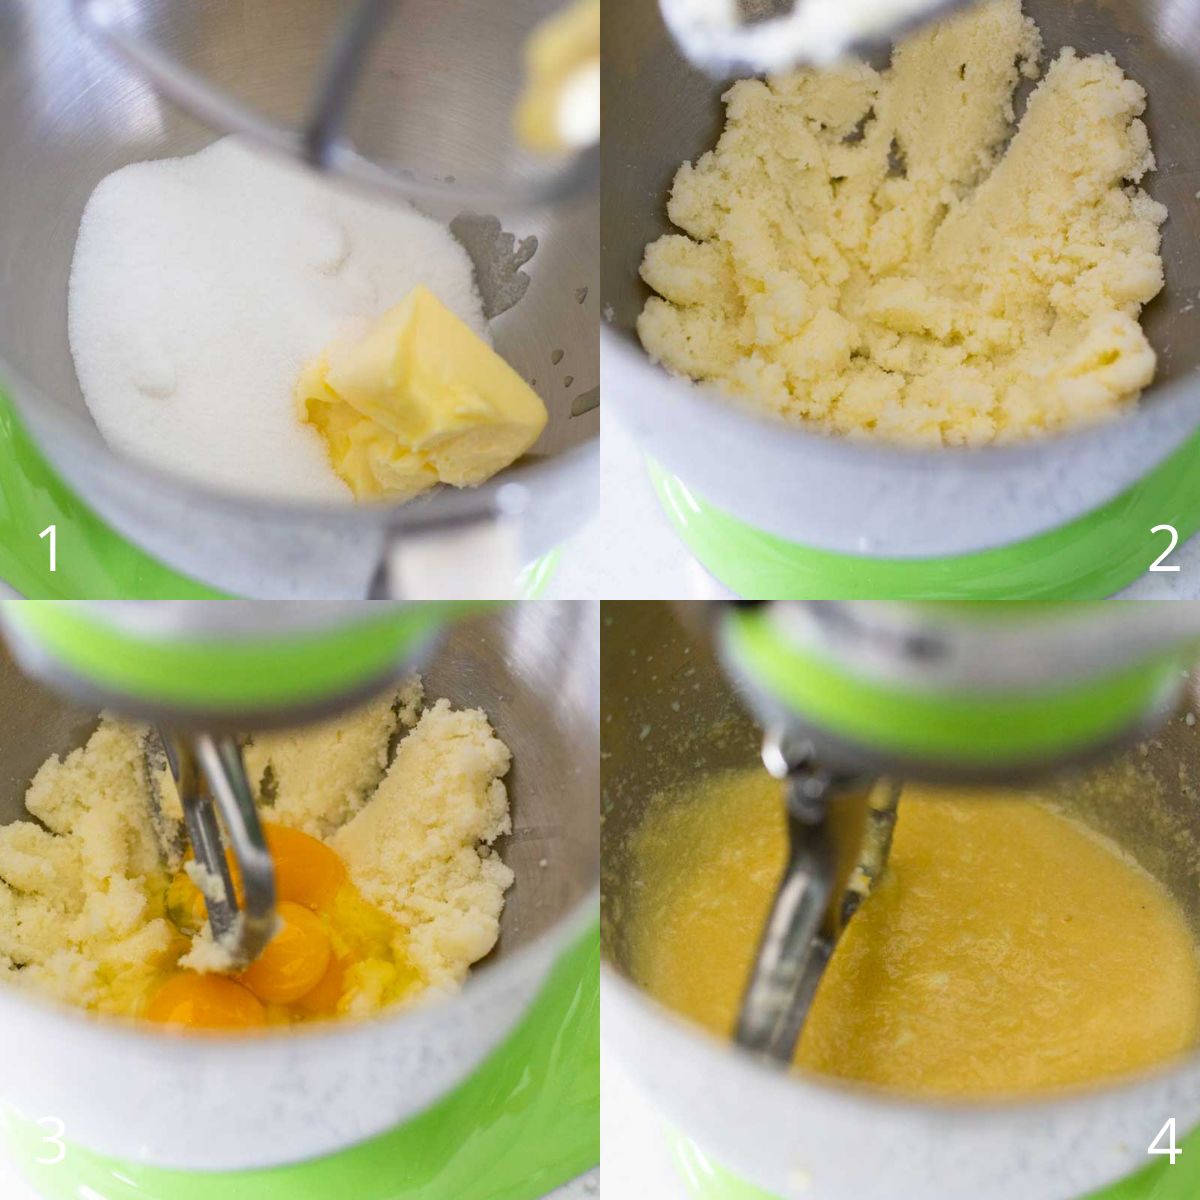 Step by step photos show how to cream the butter and add the eggs.